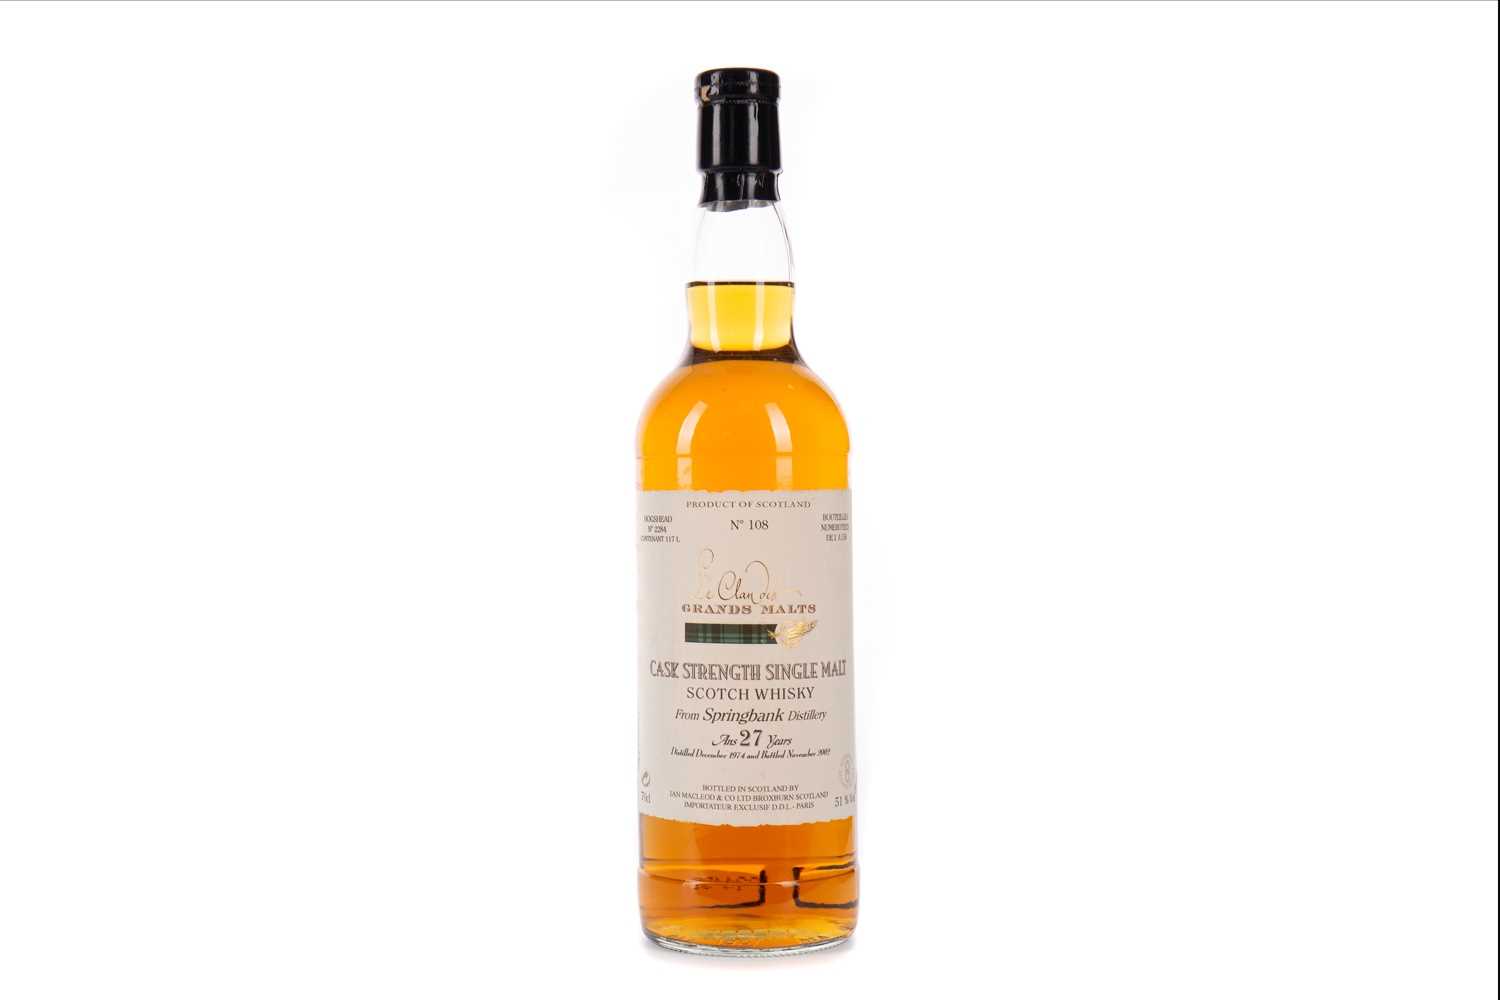 Lot 61 - SPRINGBANK 1974 LE CLAN DES GRAND MALTS AGED 27 YEARS